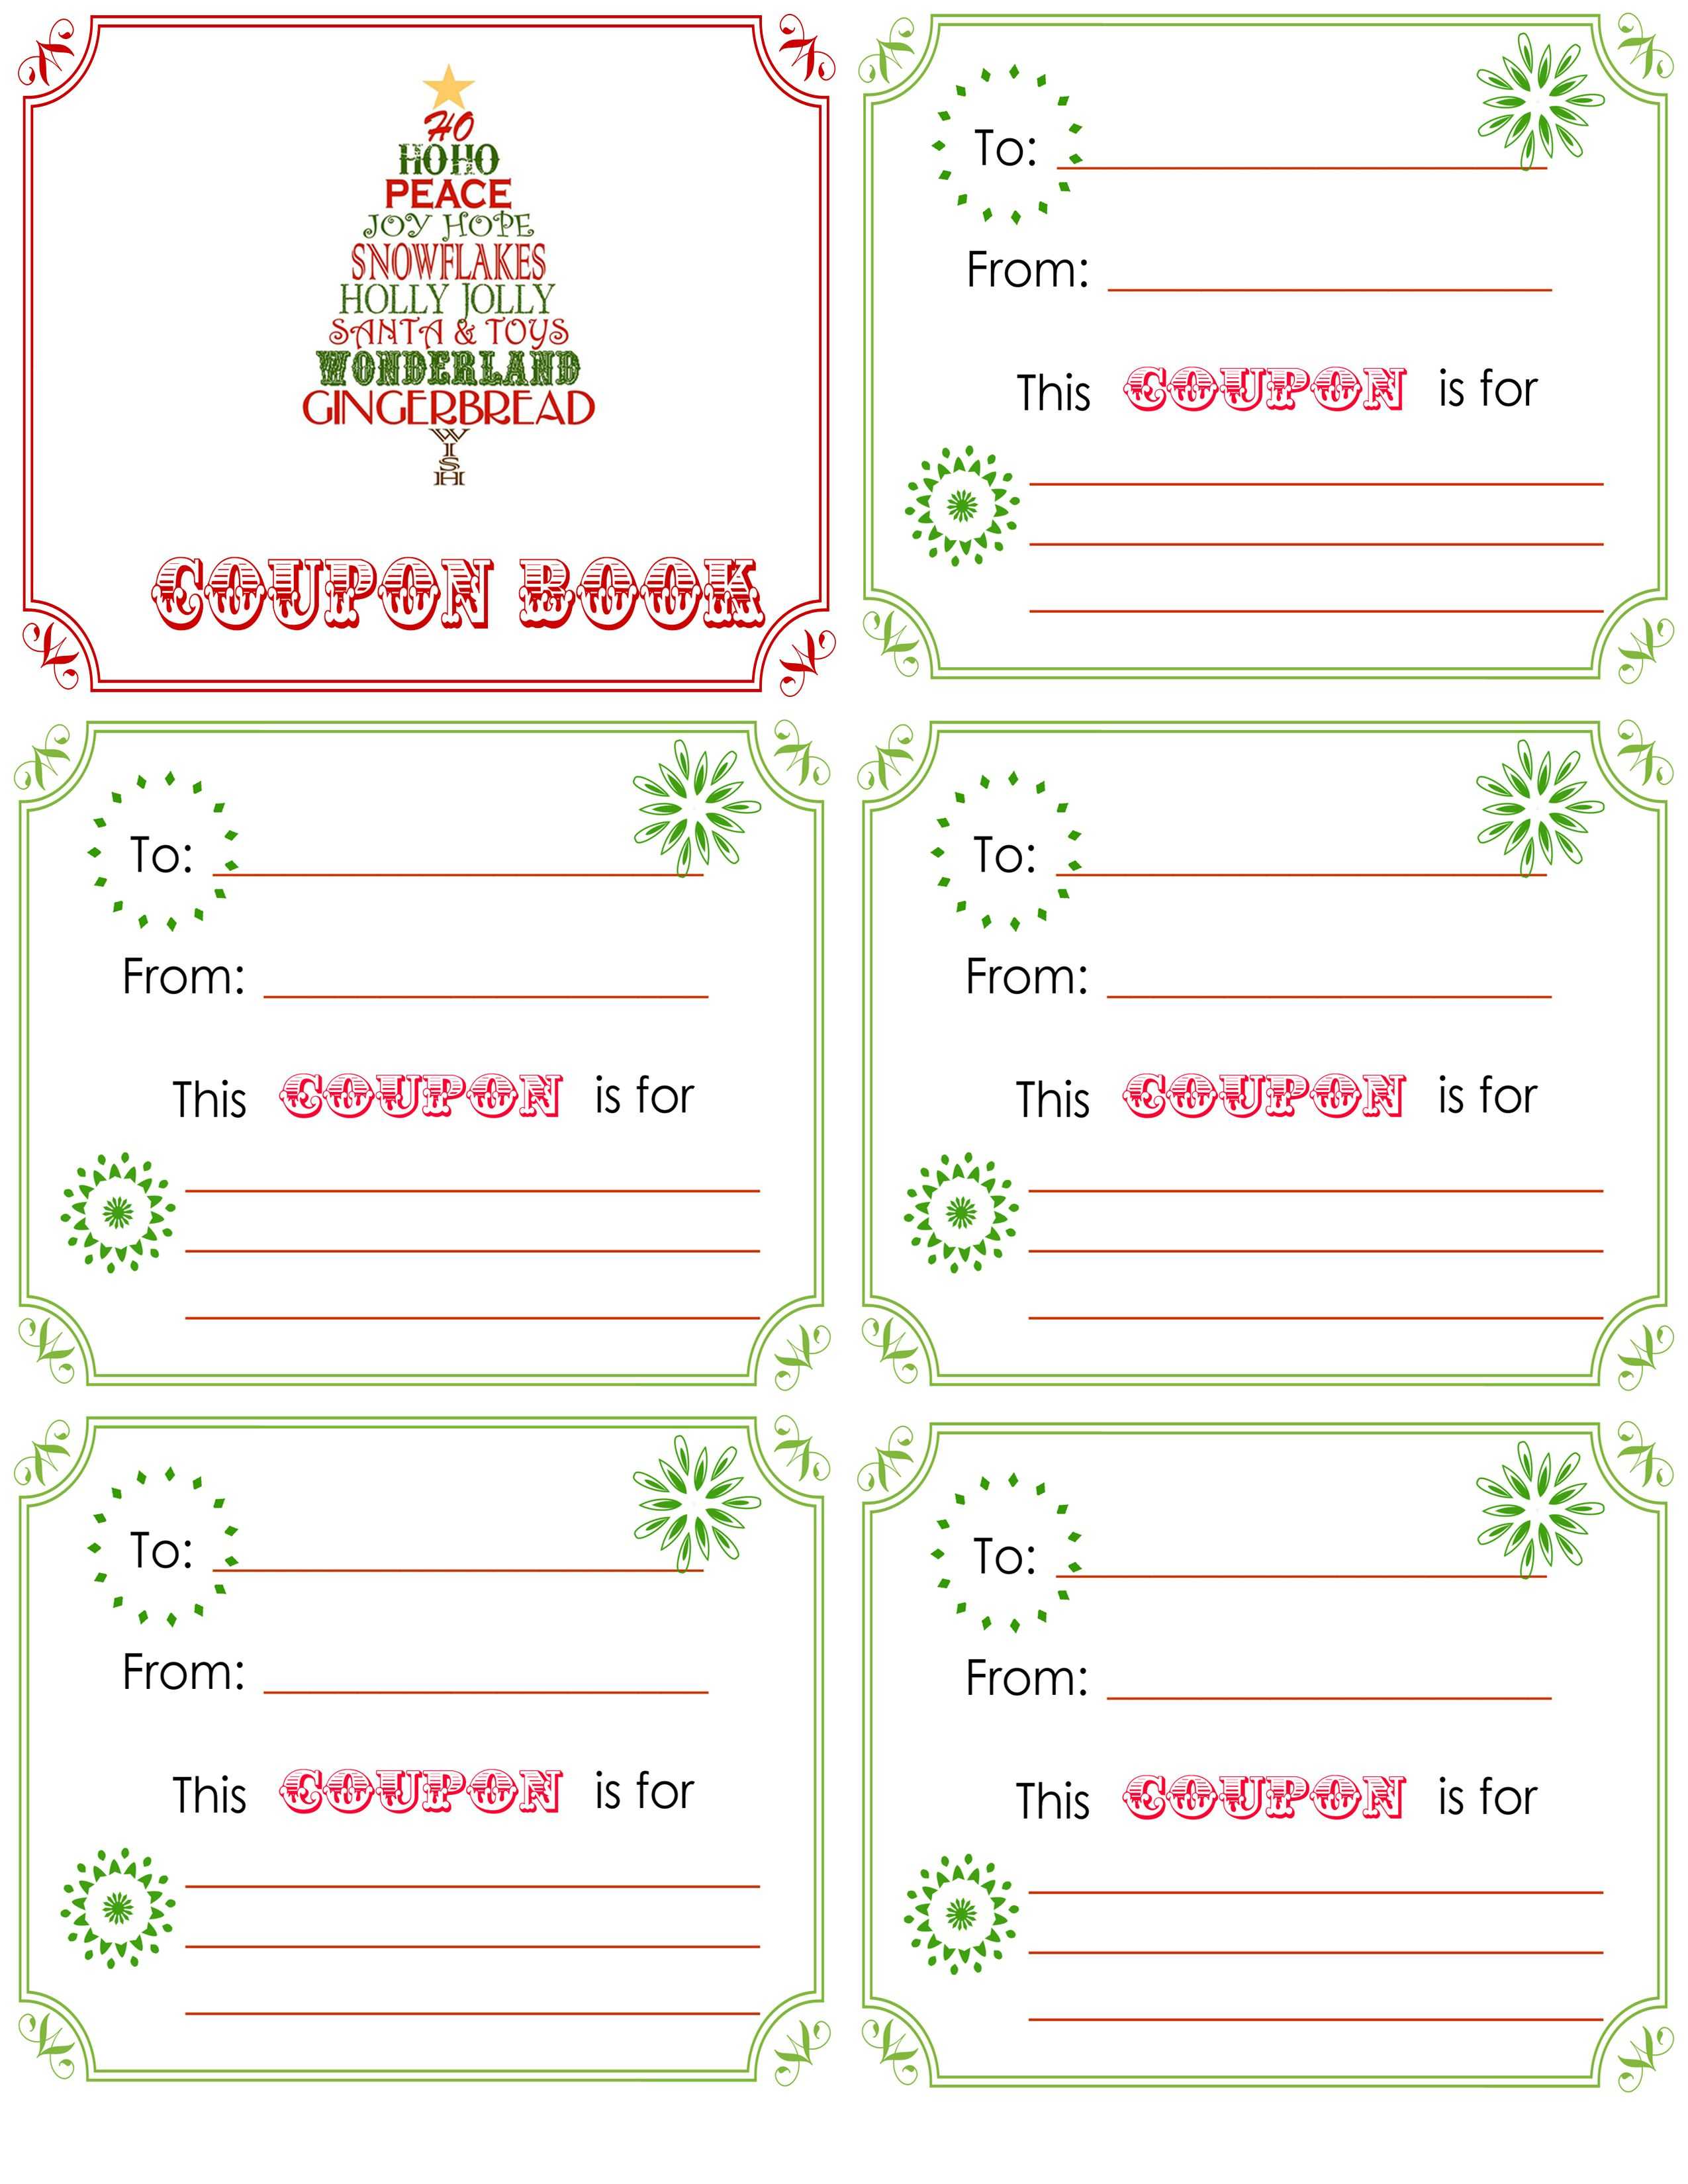 Printable Christmas Coupon Book. L Is Getting 15 Minute With Blank Coupon Template Printable